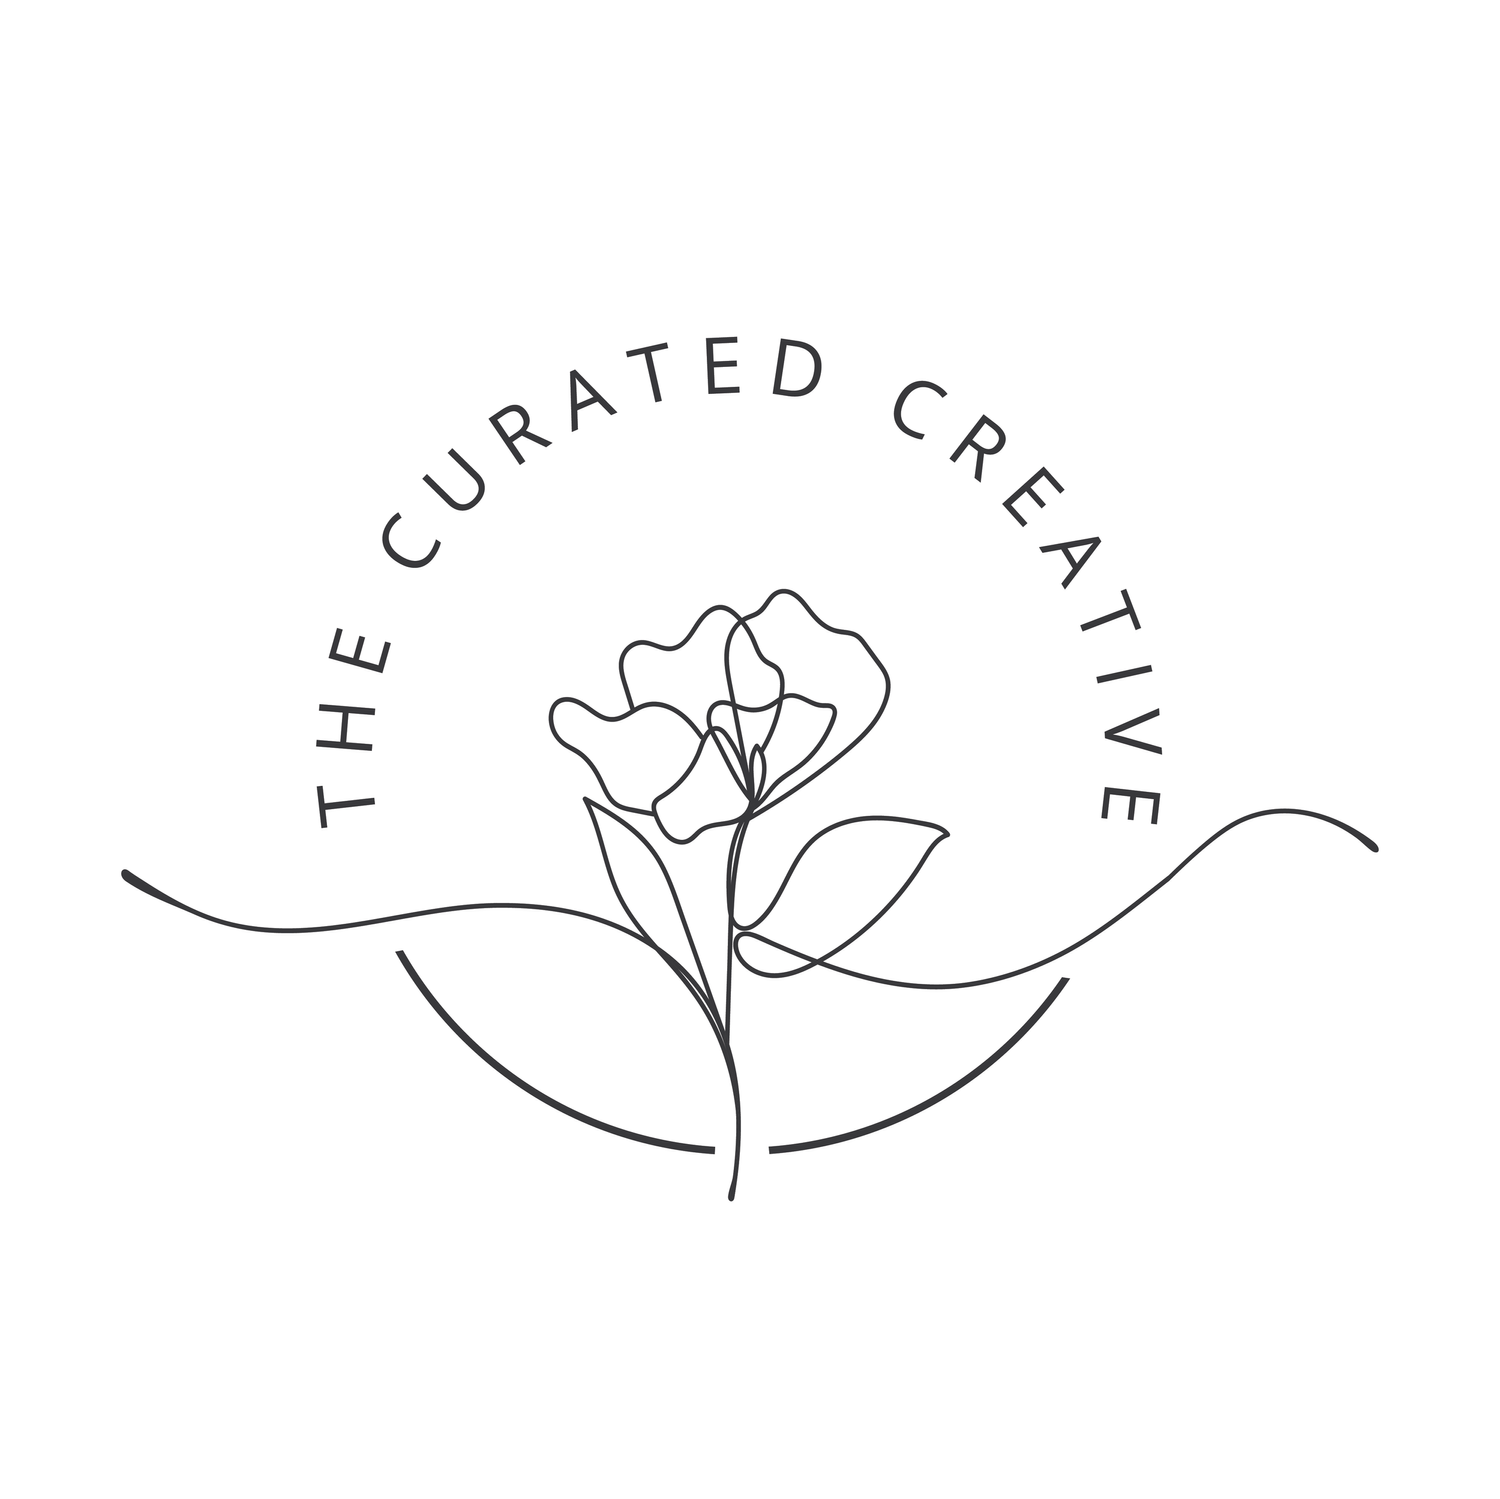 The Curated Creative